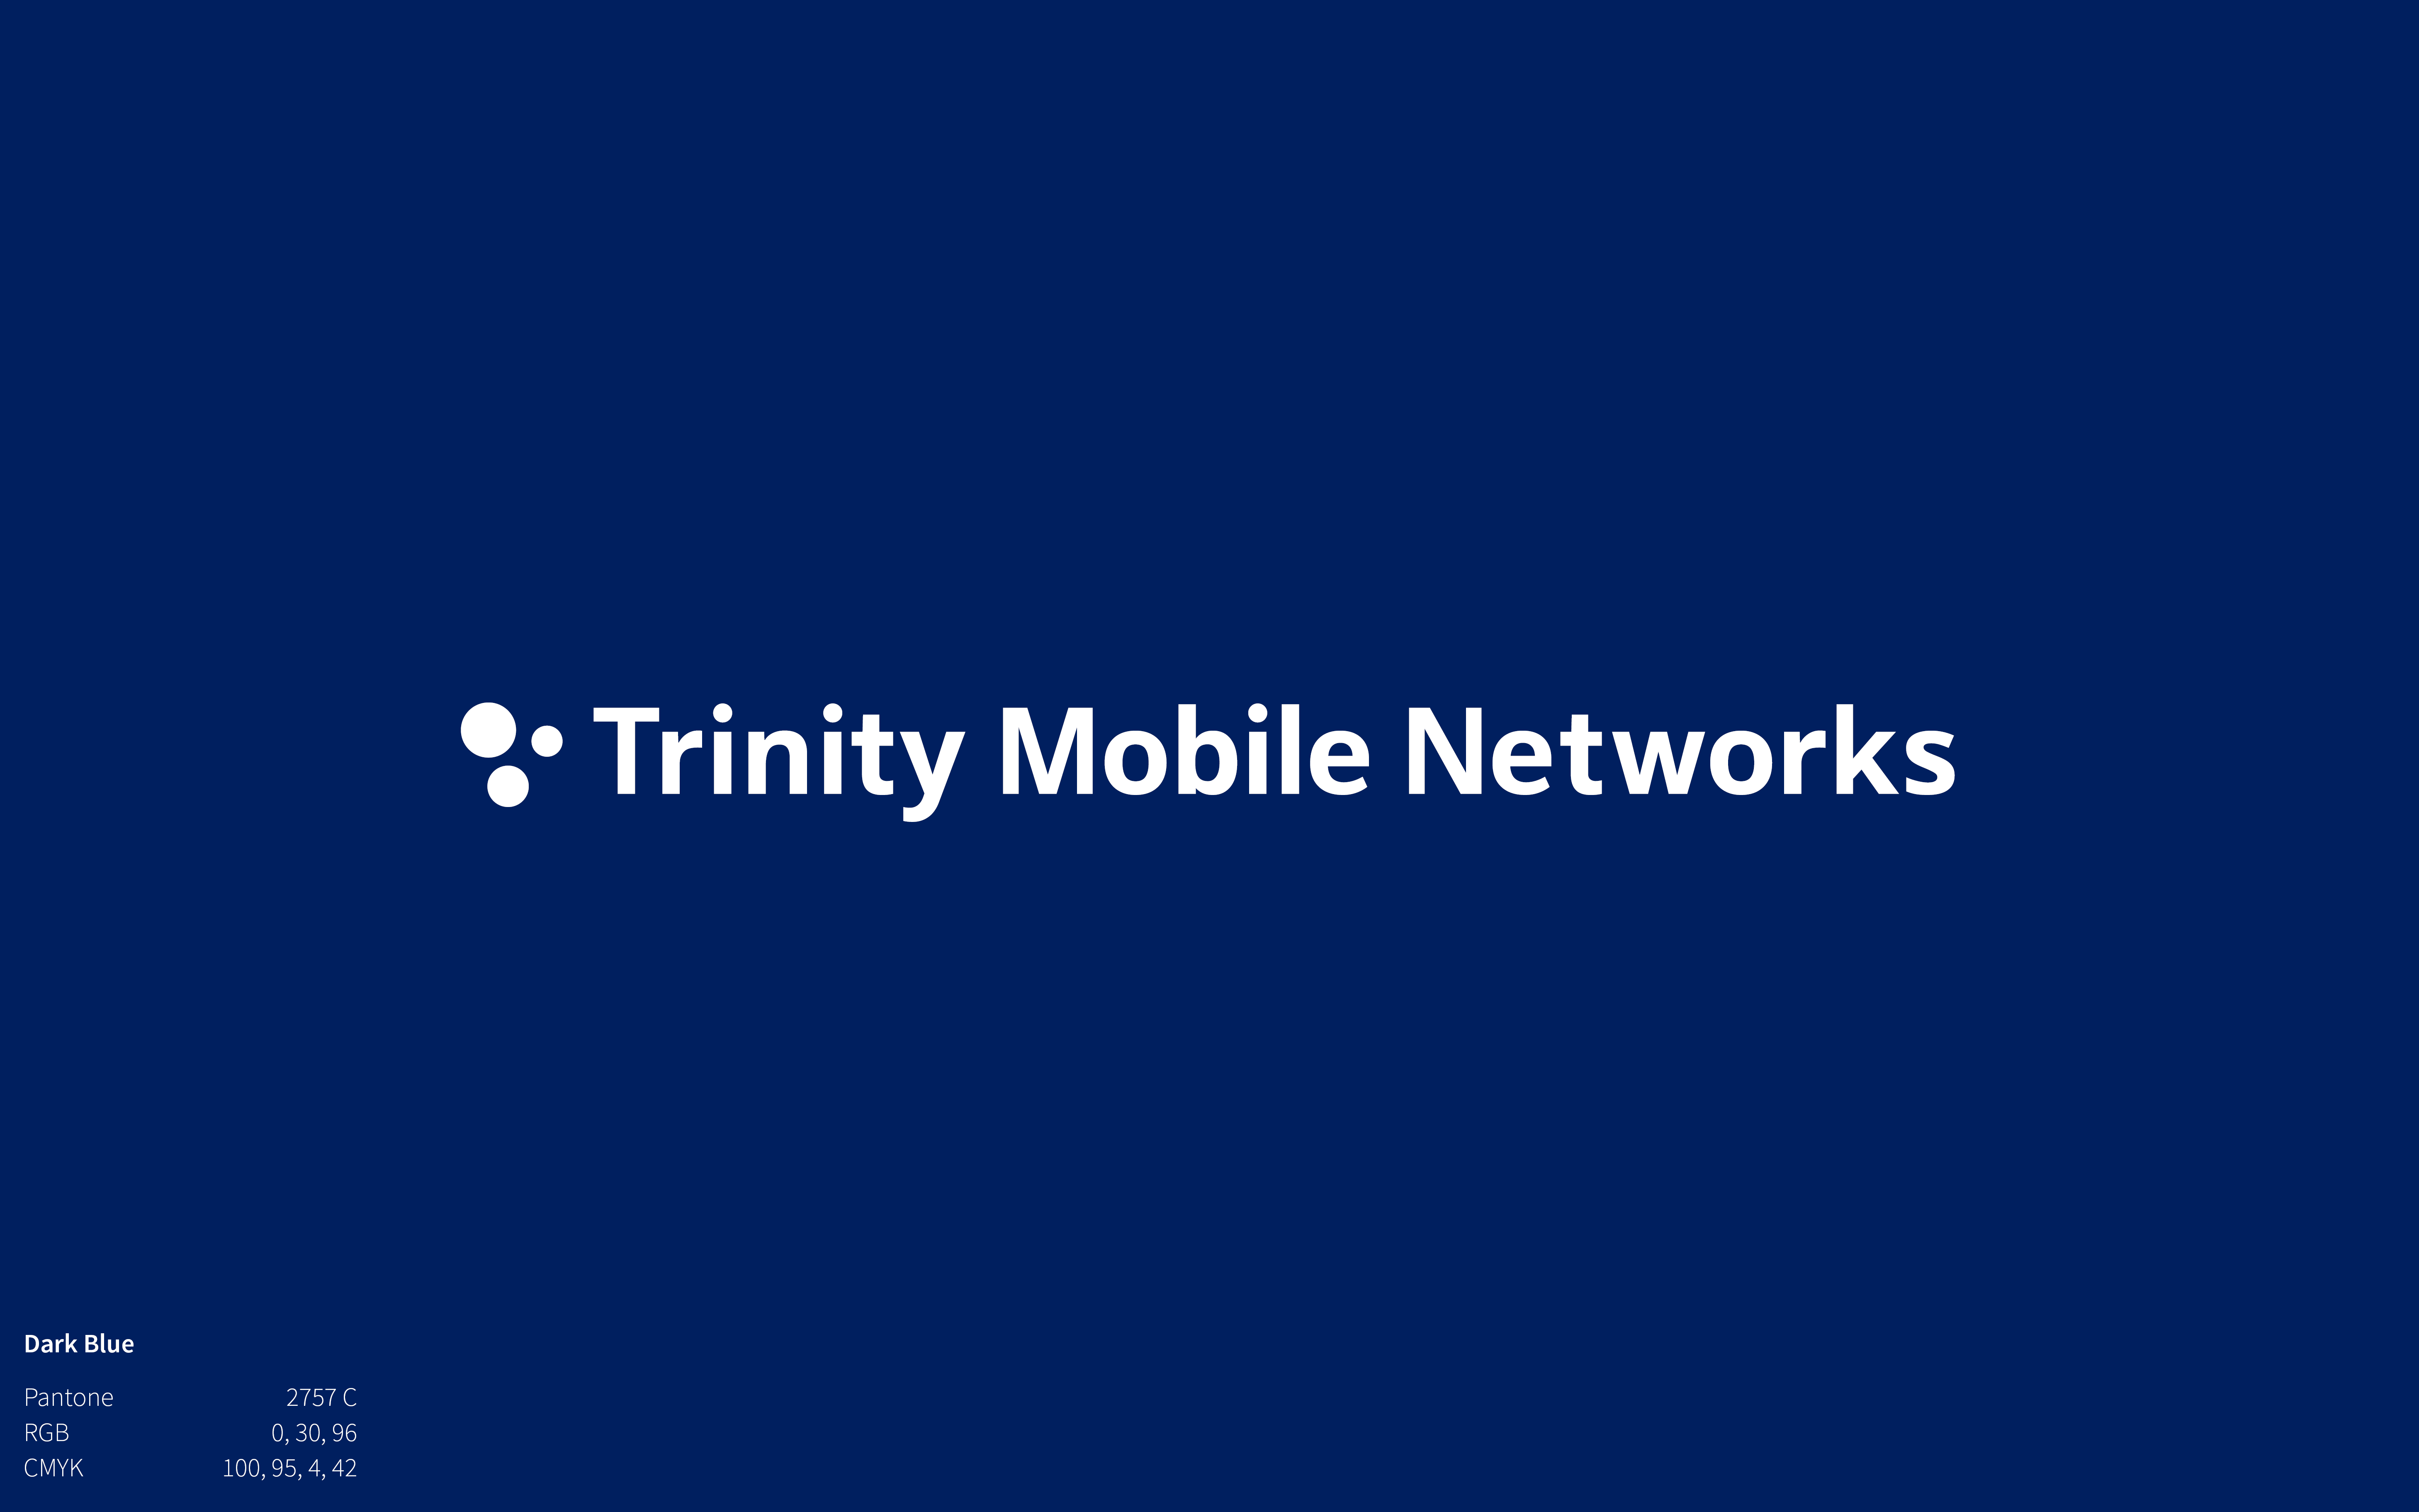 The Trinity Mobile Networks logo on a background of Dark Blue